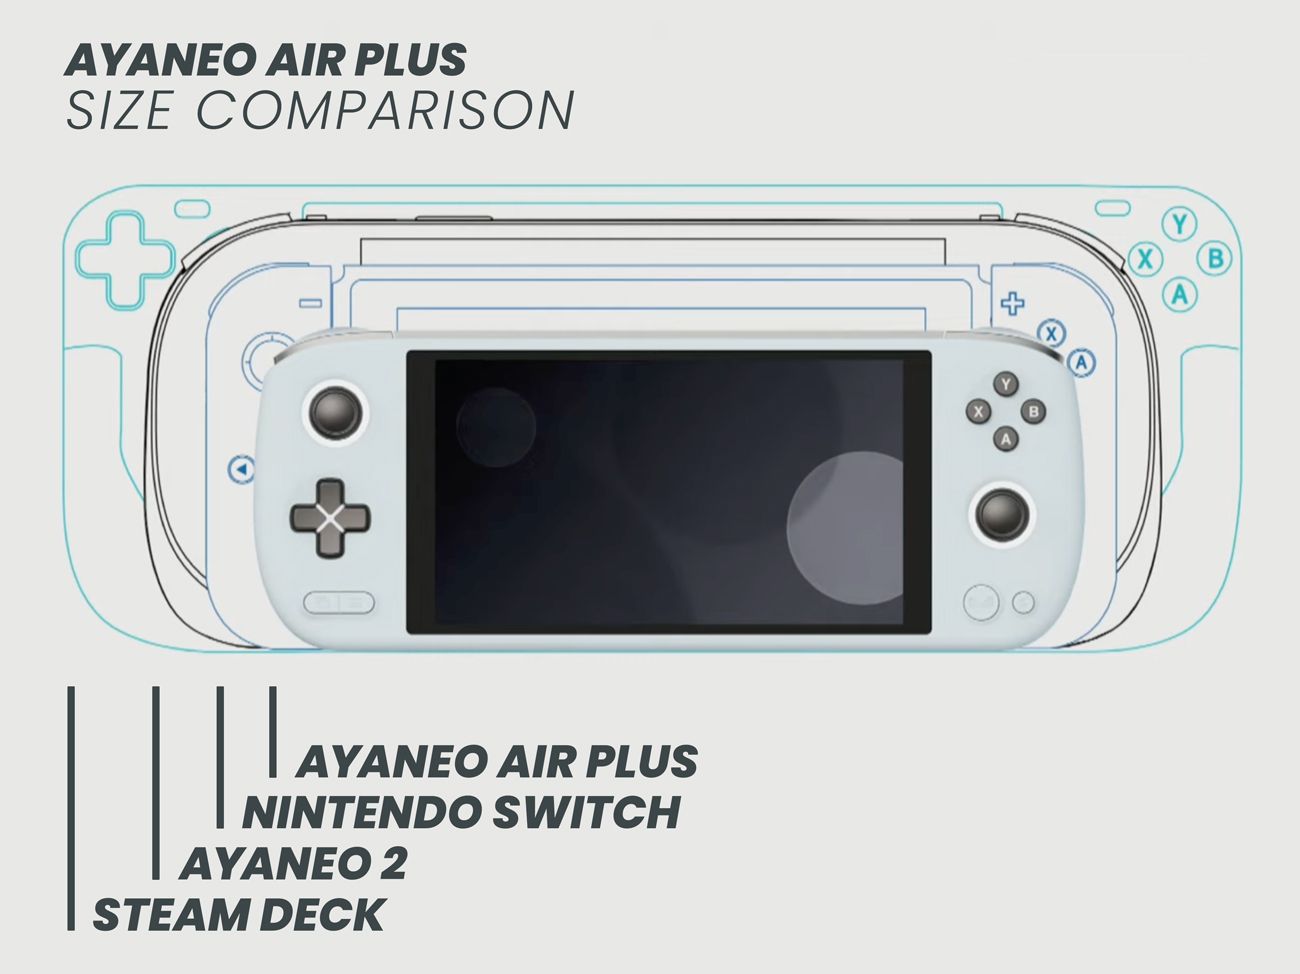 The AYANEO Air Plus compared to the Nintendo Switch, the AYANEO2, and the Steam Deck.